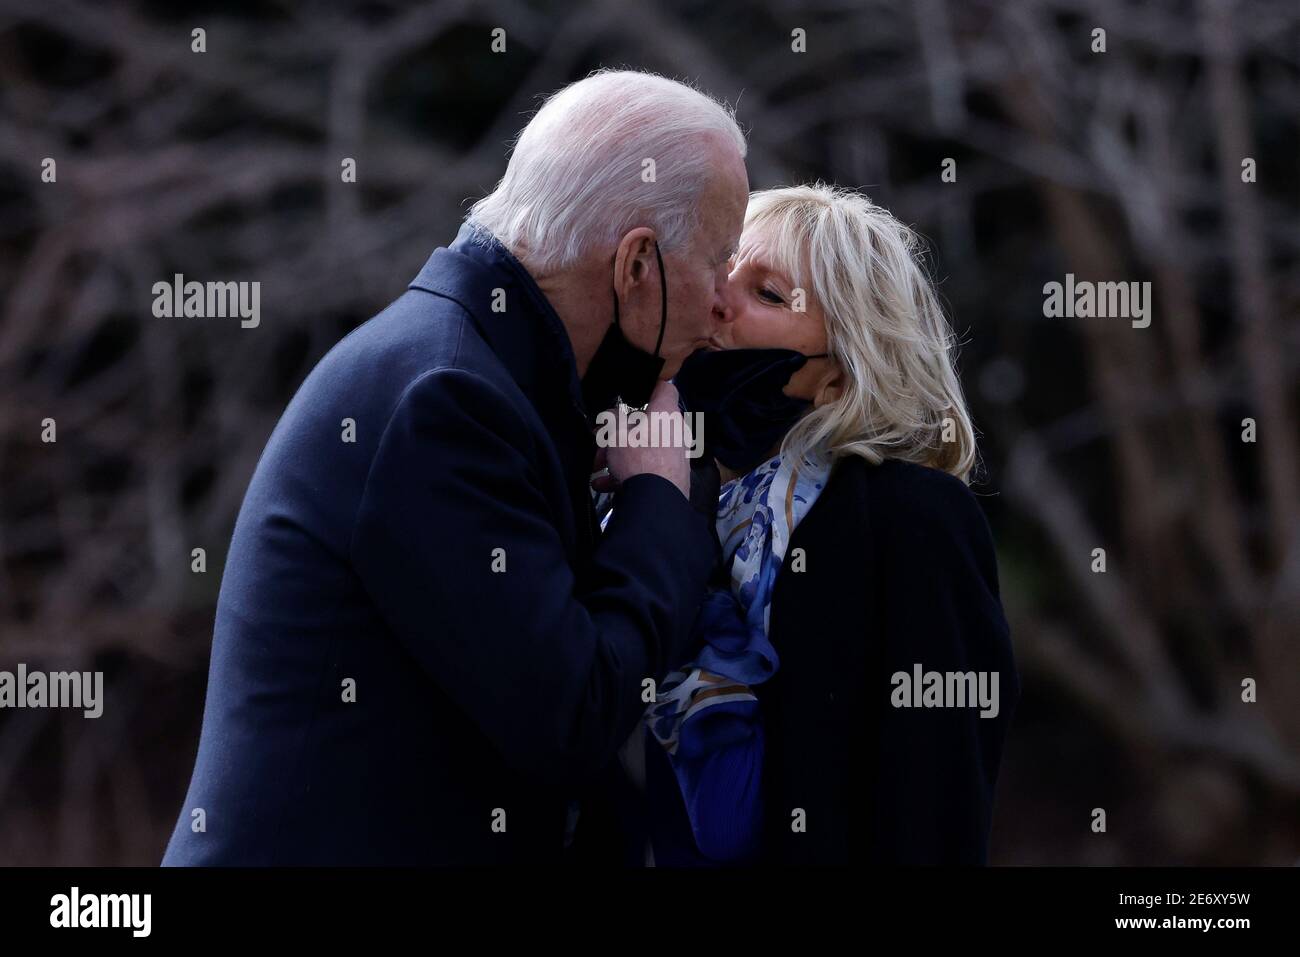 Page 2 - Kiss Goodbye High Resolution Stock Photography and Images - Alamy